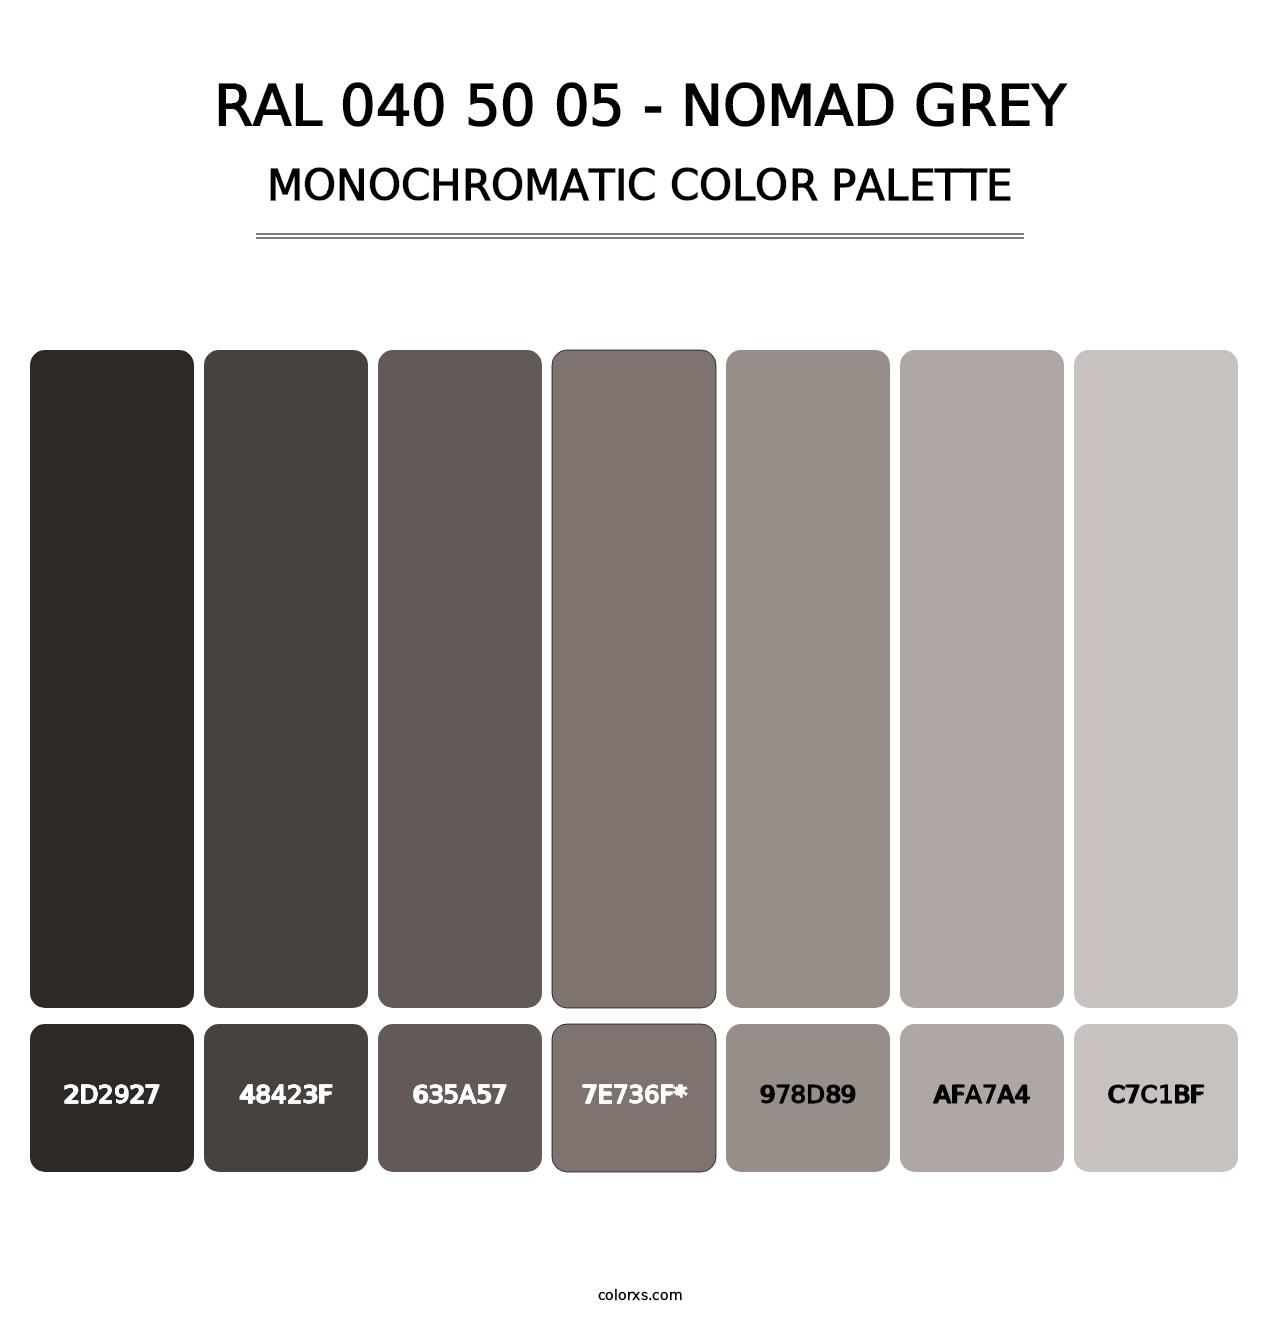 RAL 040 50 05 - Nomad Grey - Monochromatic Color Palette